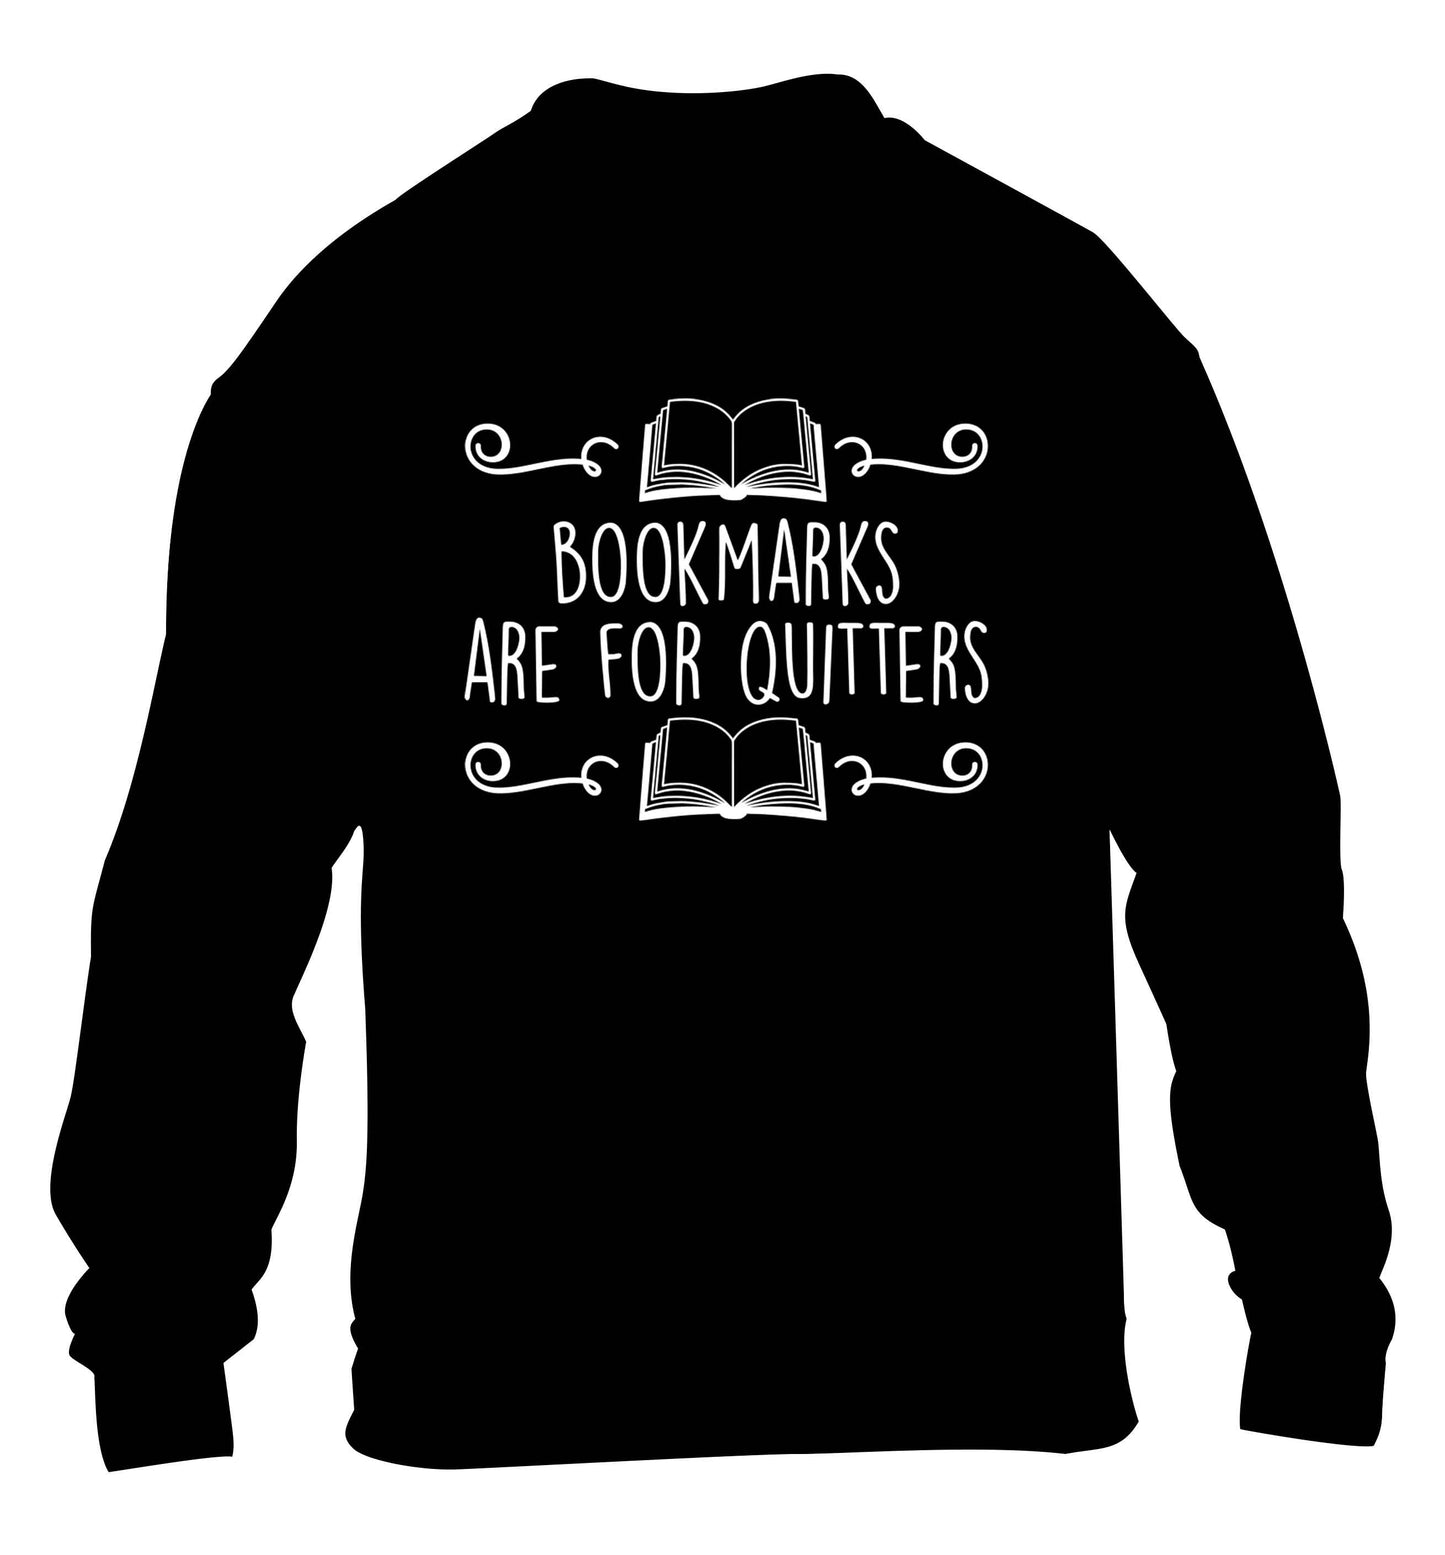 Bookmarks are for quitters children's black sweater 12-13 Years